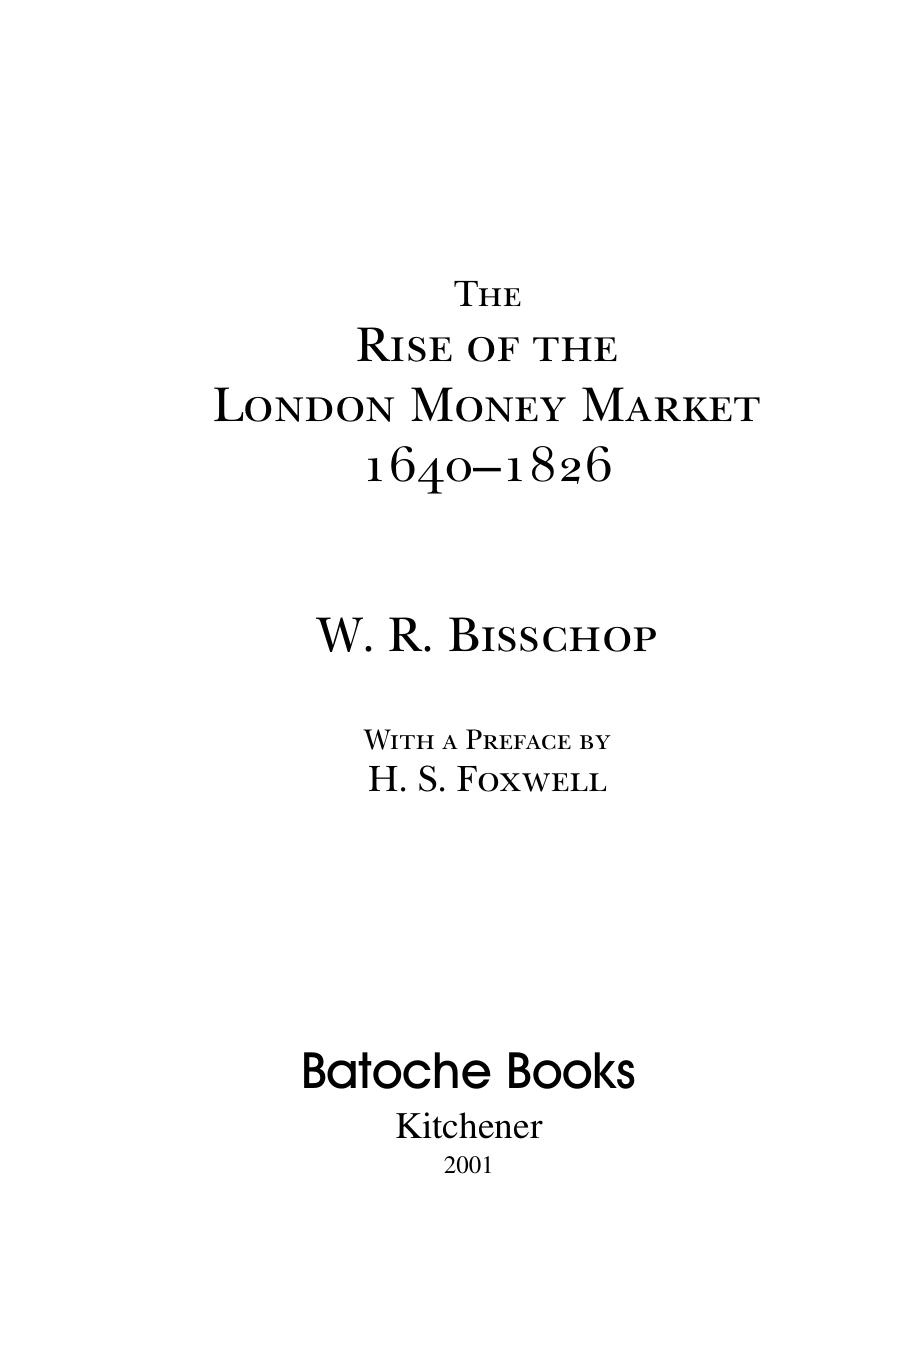 The Rise of the London Money Market 1640-1826 by W. R. Bisschop